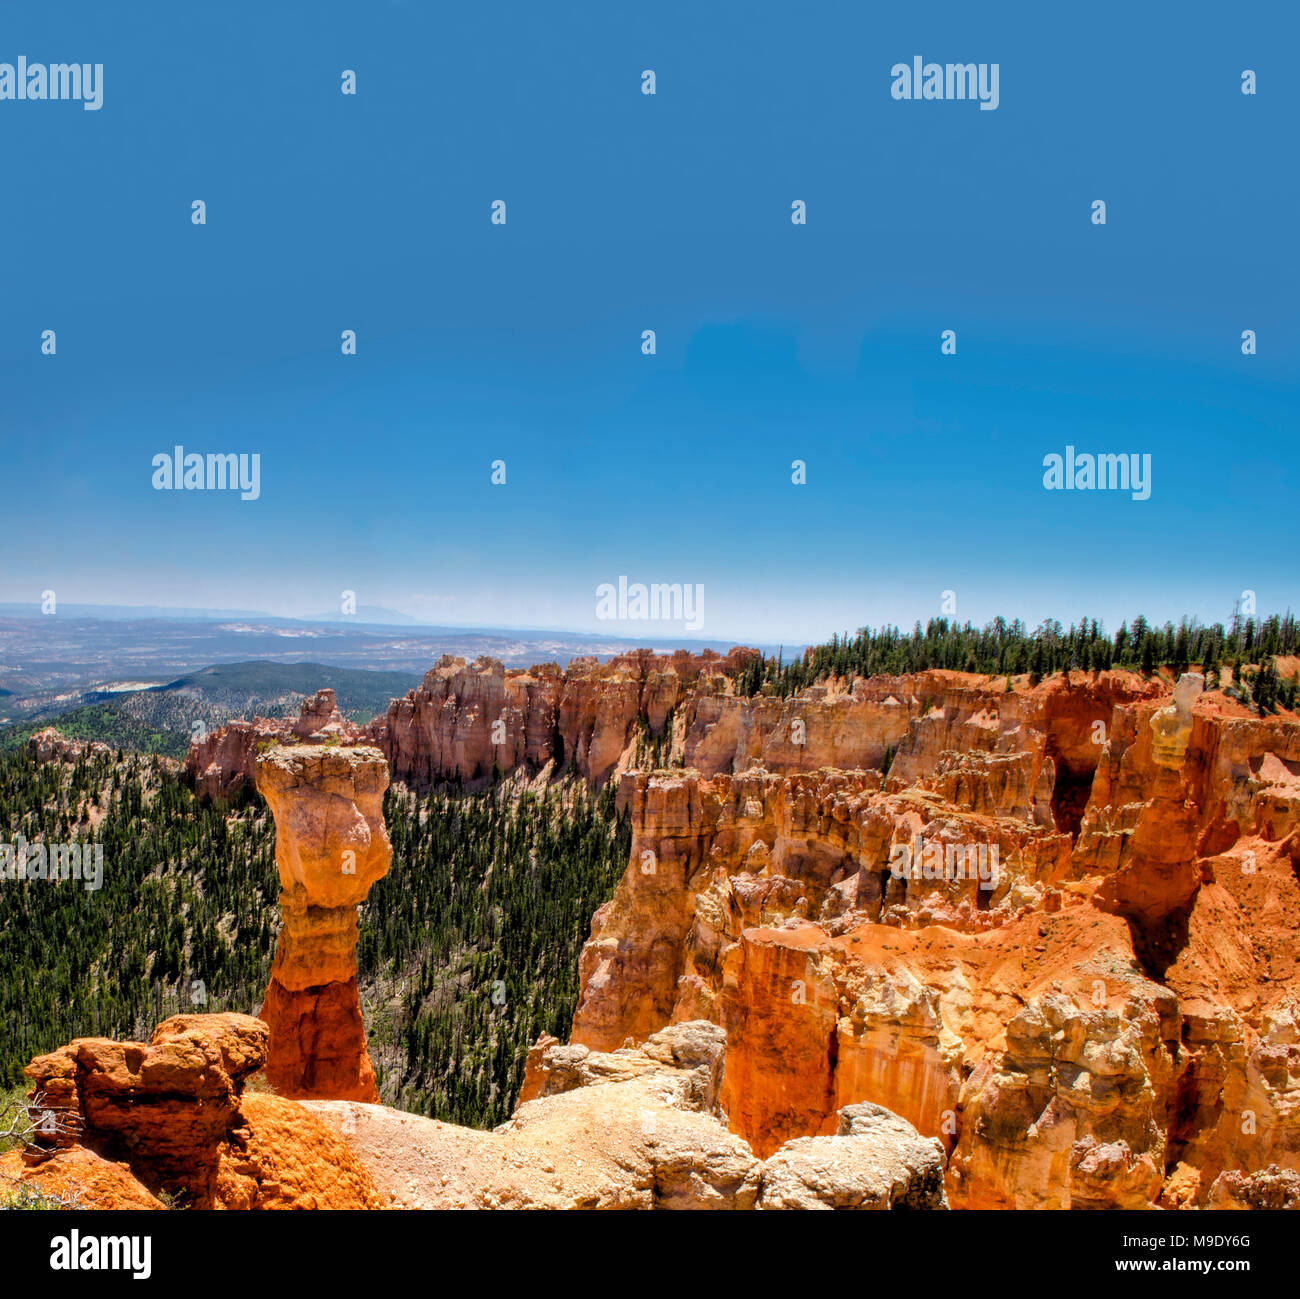 Scenic overlook at a hoodoo and various orange and red rock formations with a green valley below under blue sky with clouds. Stock Photo